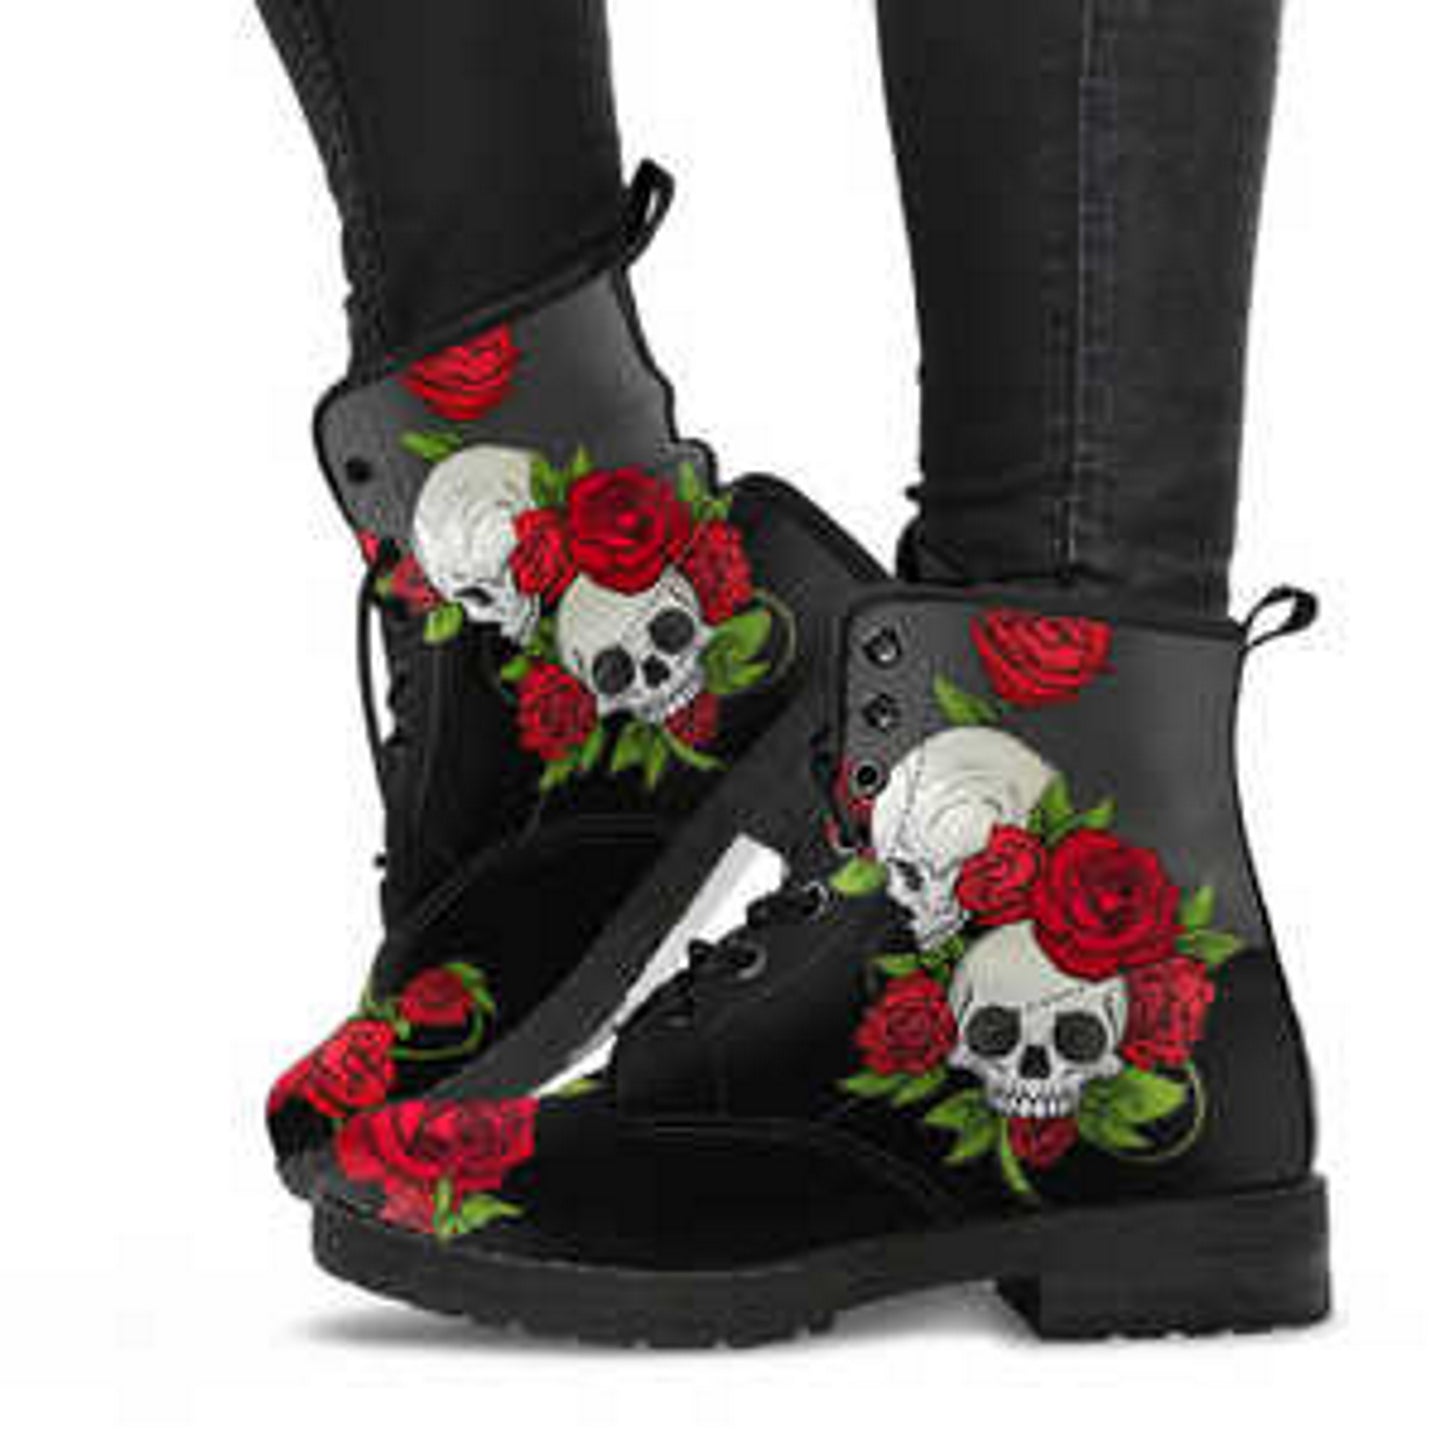 Skulls and Red Roses - READY TO SHIP